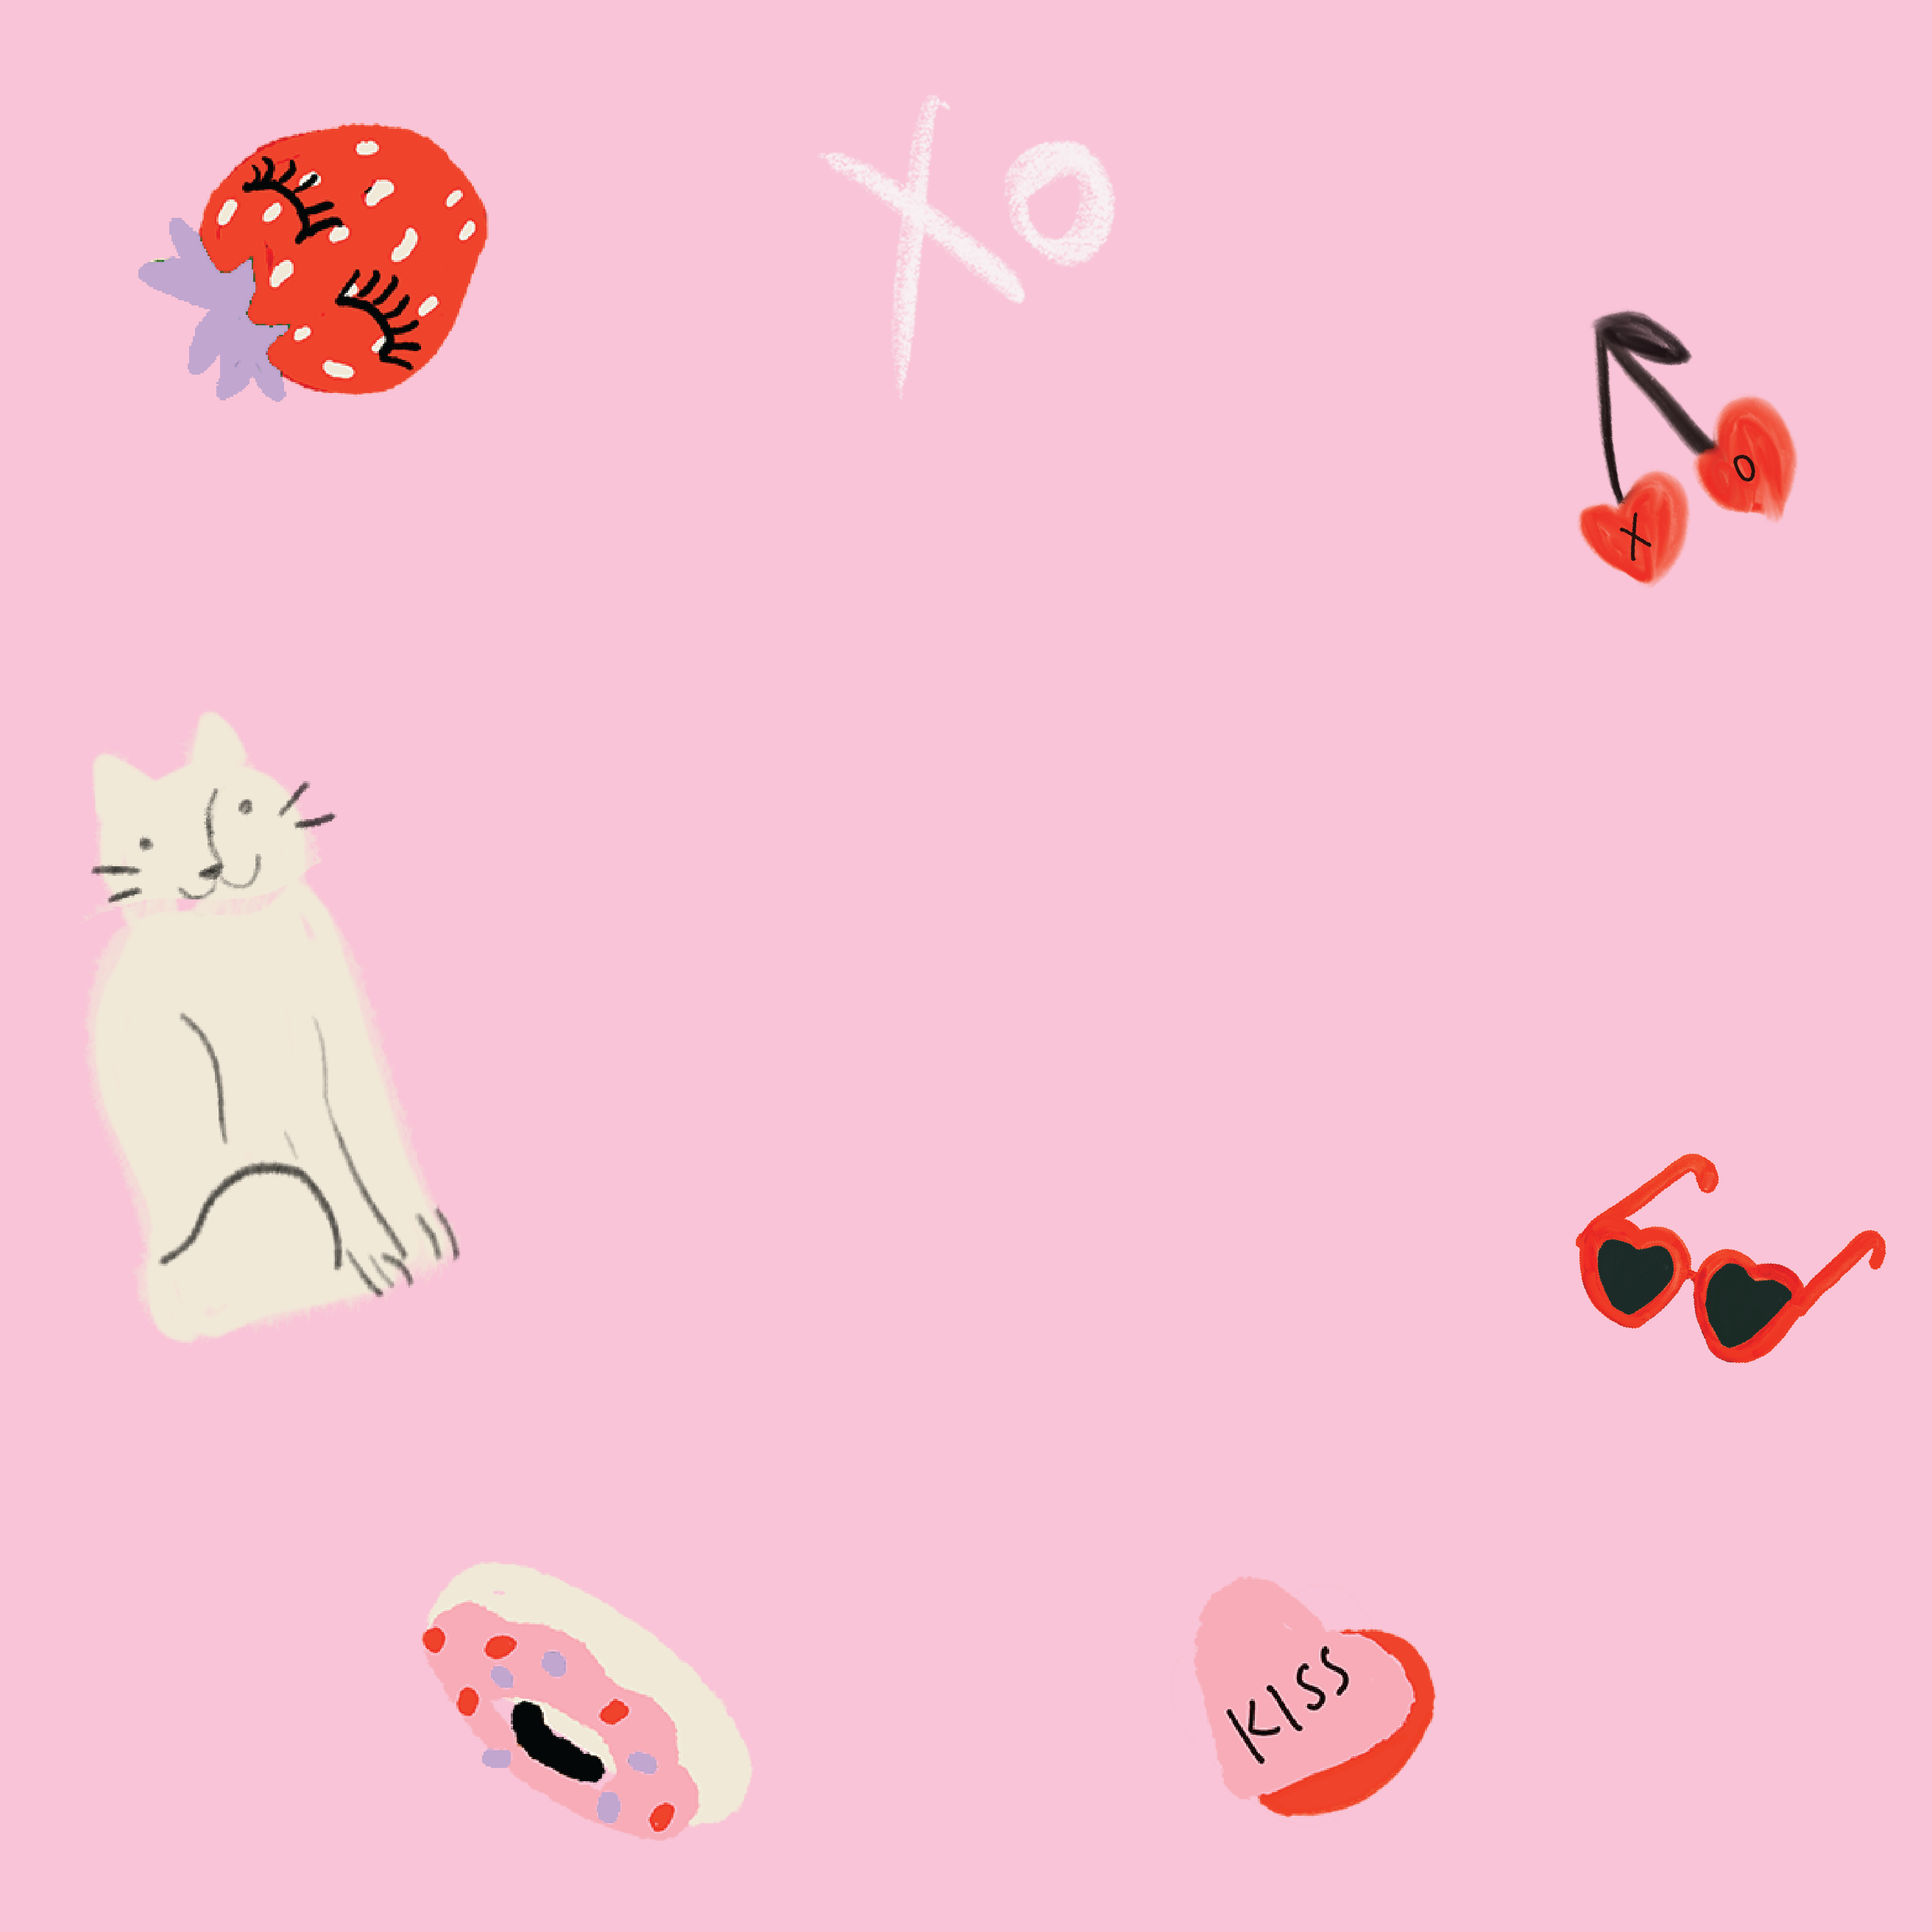 Valentines themed background pattern - hearts, cats, donuts, strawberries - Mobile image